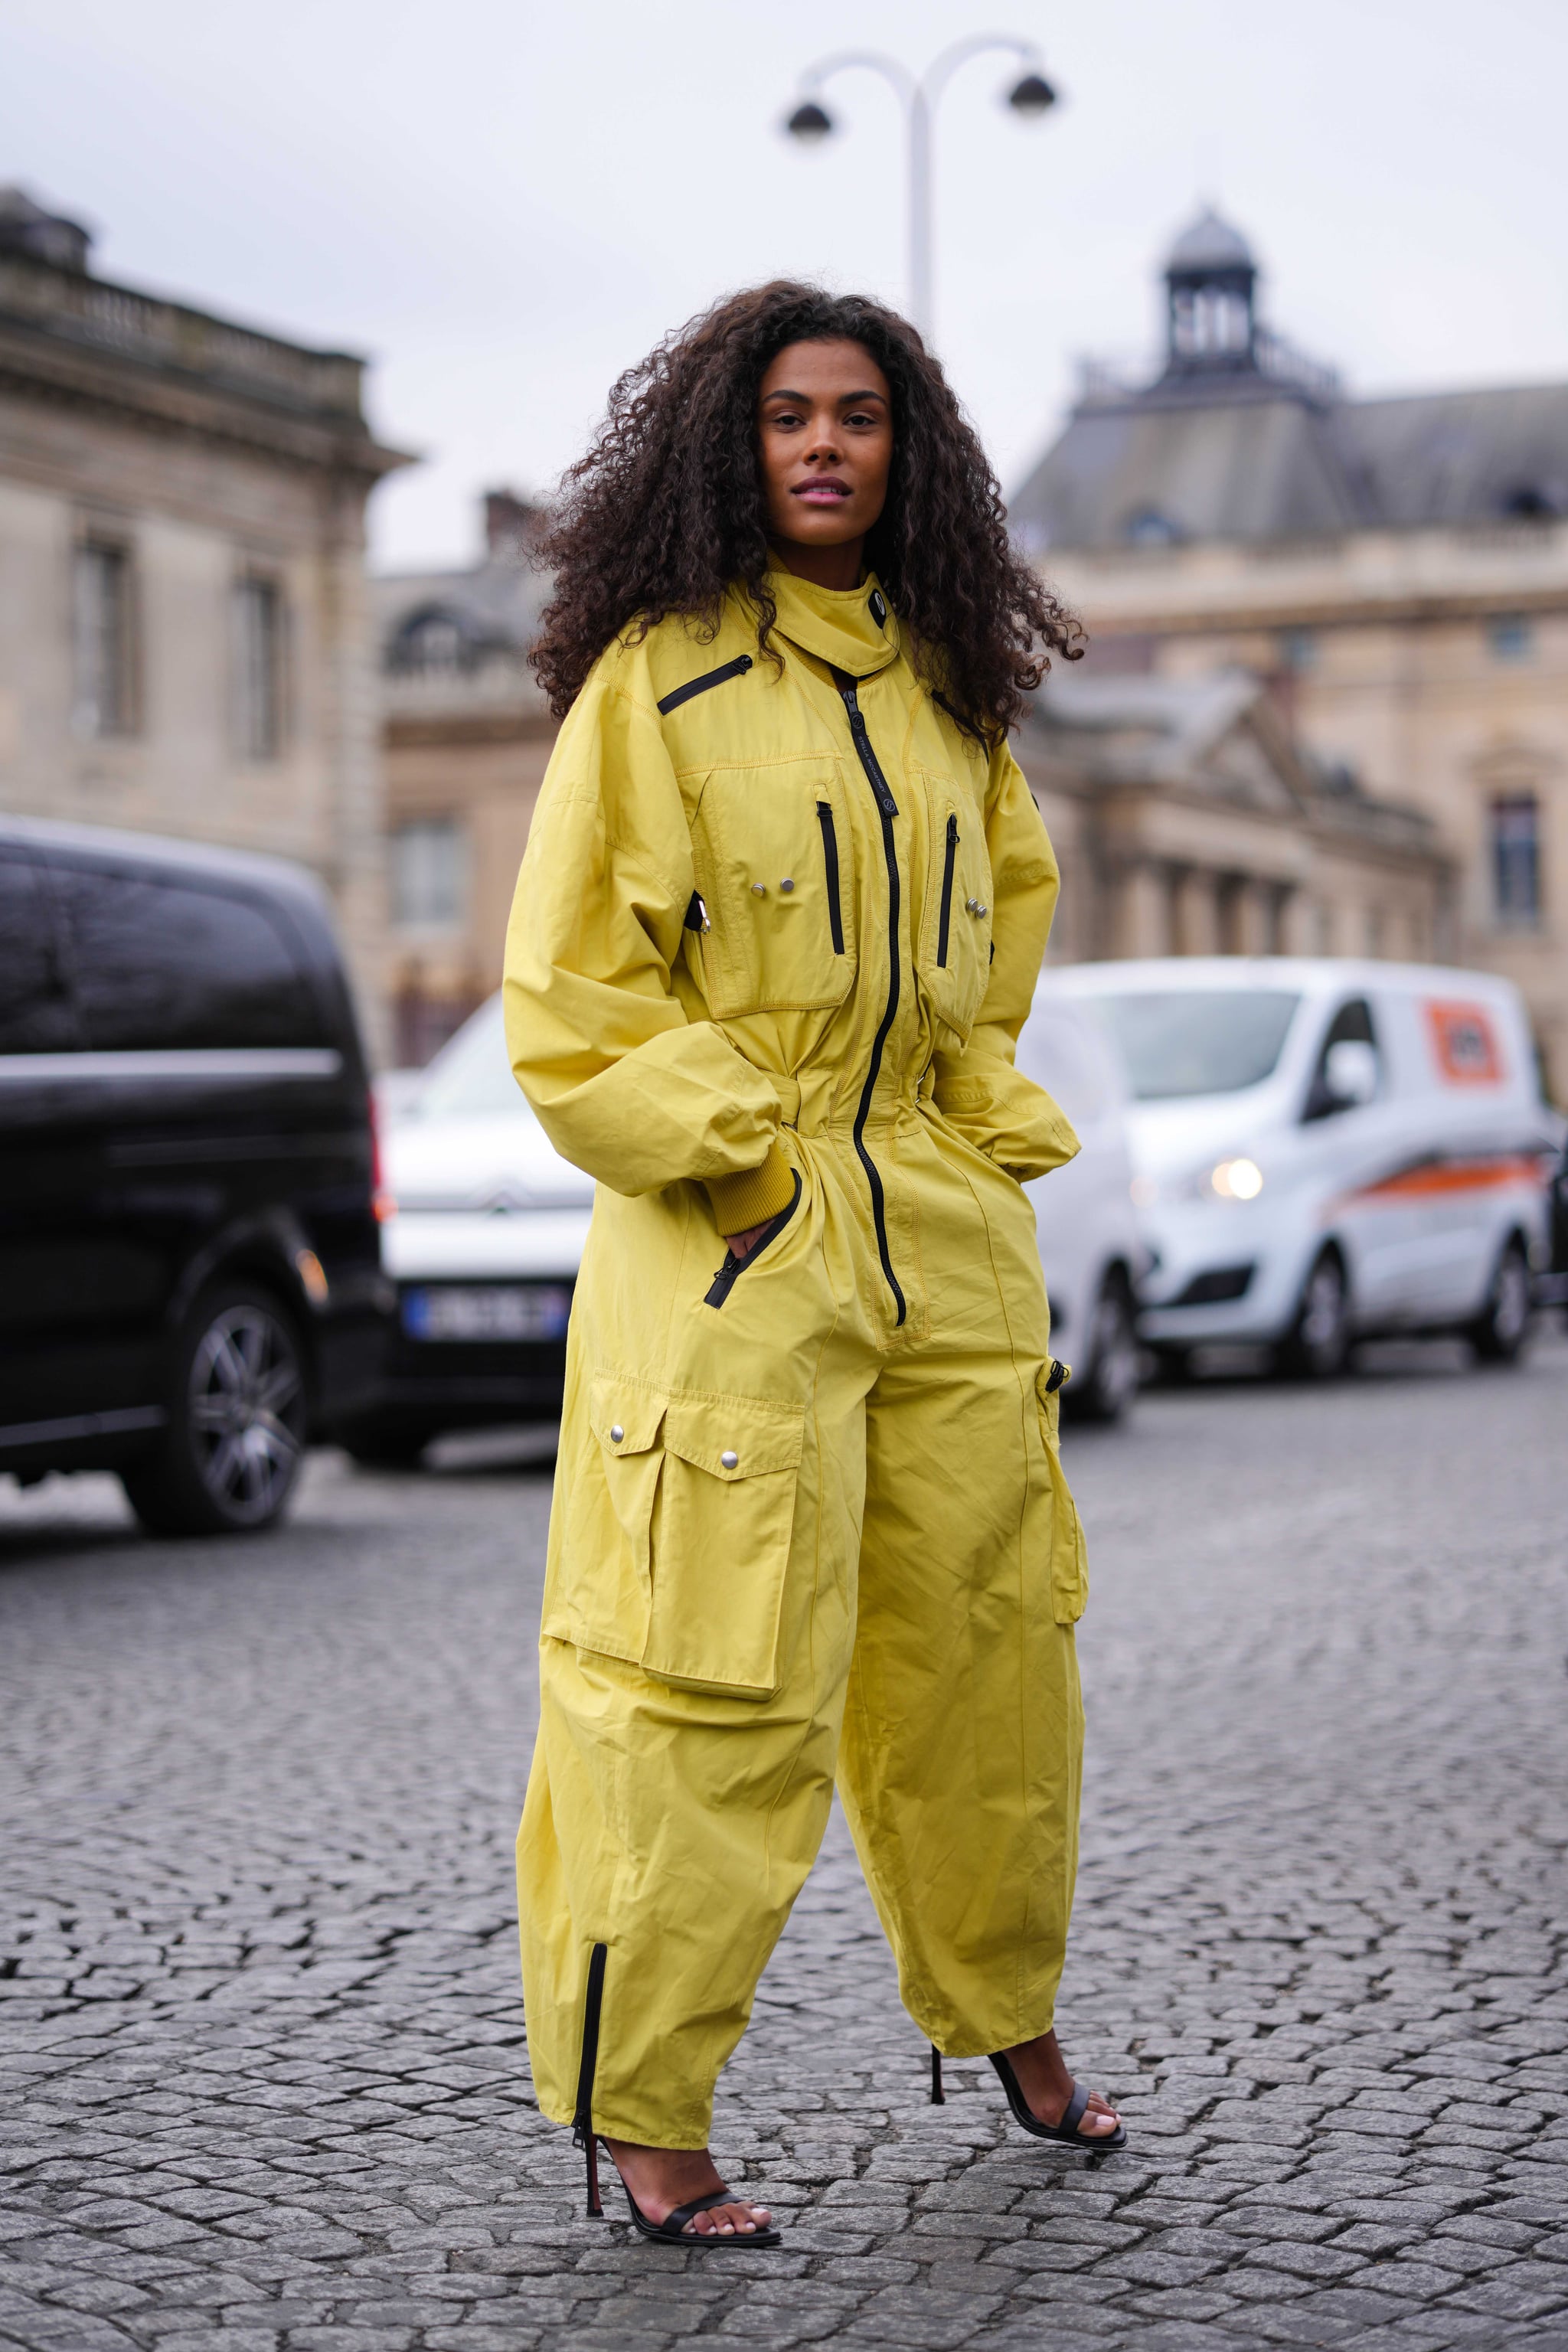 PARIS, FRANCE - MARCH 06: A guest wears a yellow high neck / puffy long sleeves / black zipper details cargo jumpsuit, black shiny leather heels strappy sandals , outside Stella McCartney, during Paris Fashion Week - Womenswear Fall Winter 2023 2024, on March 06, 2023 in Paris, France. (Photo by Edward Berthelot/Getty Images)